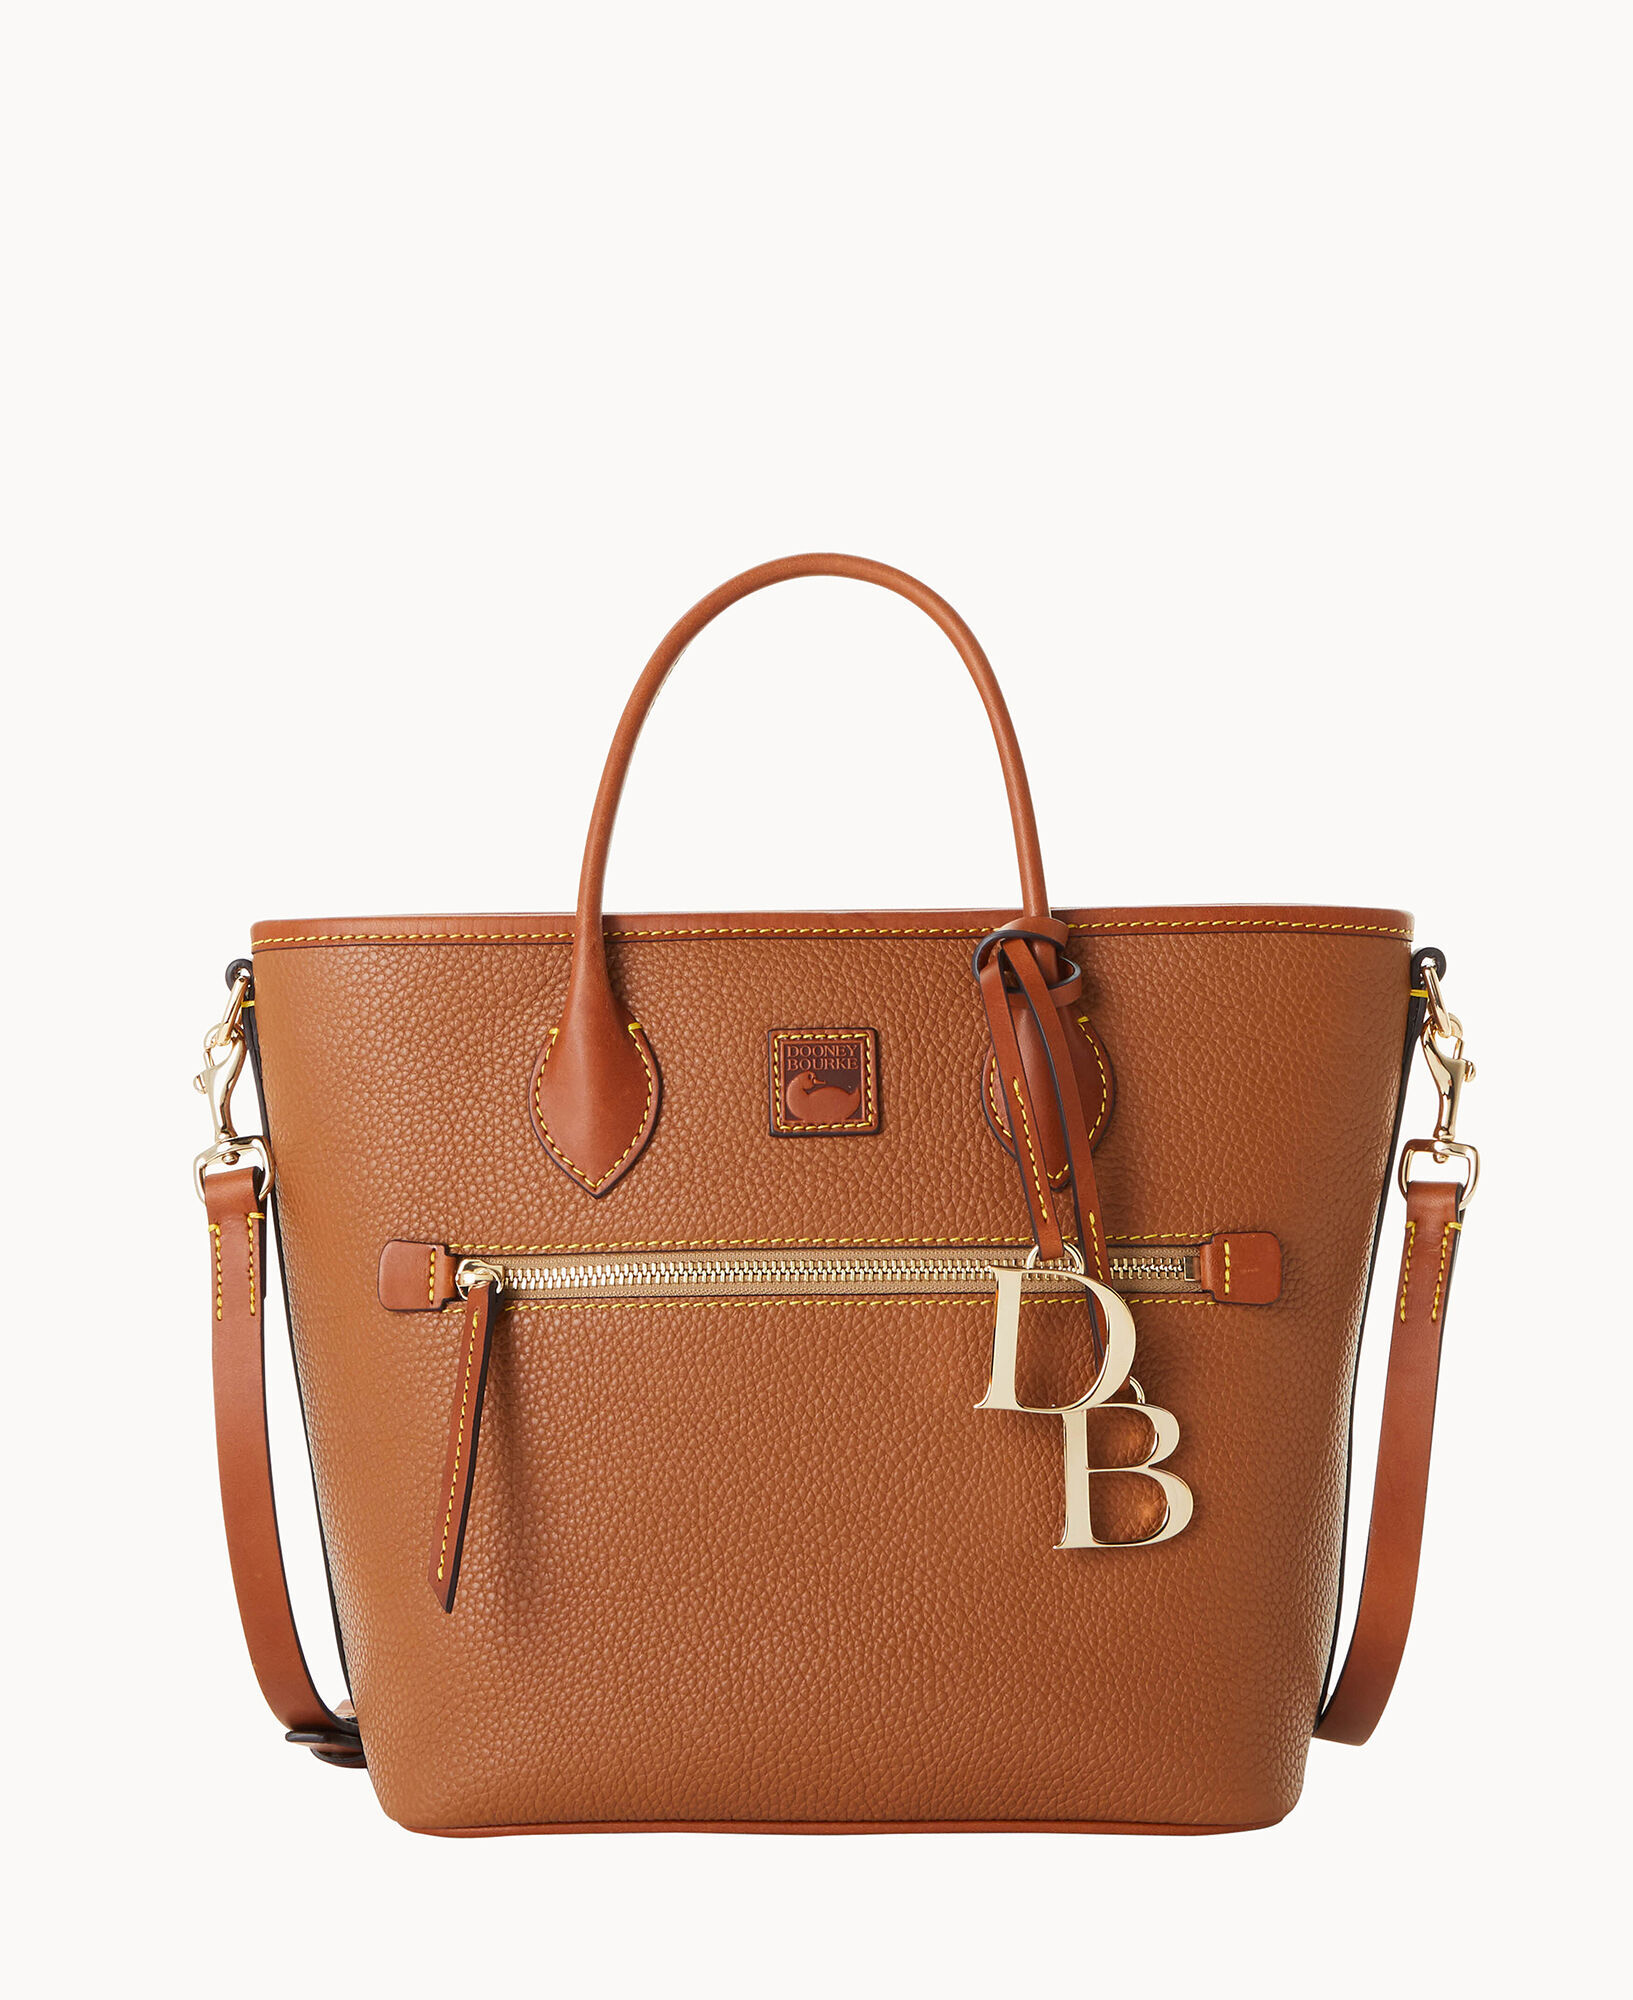 pebble leather tote